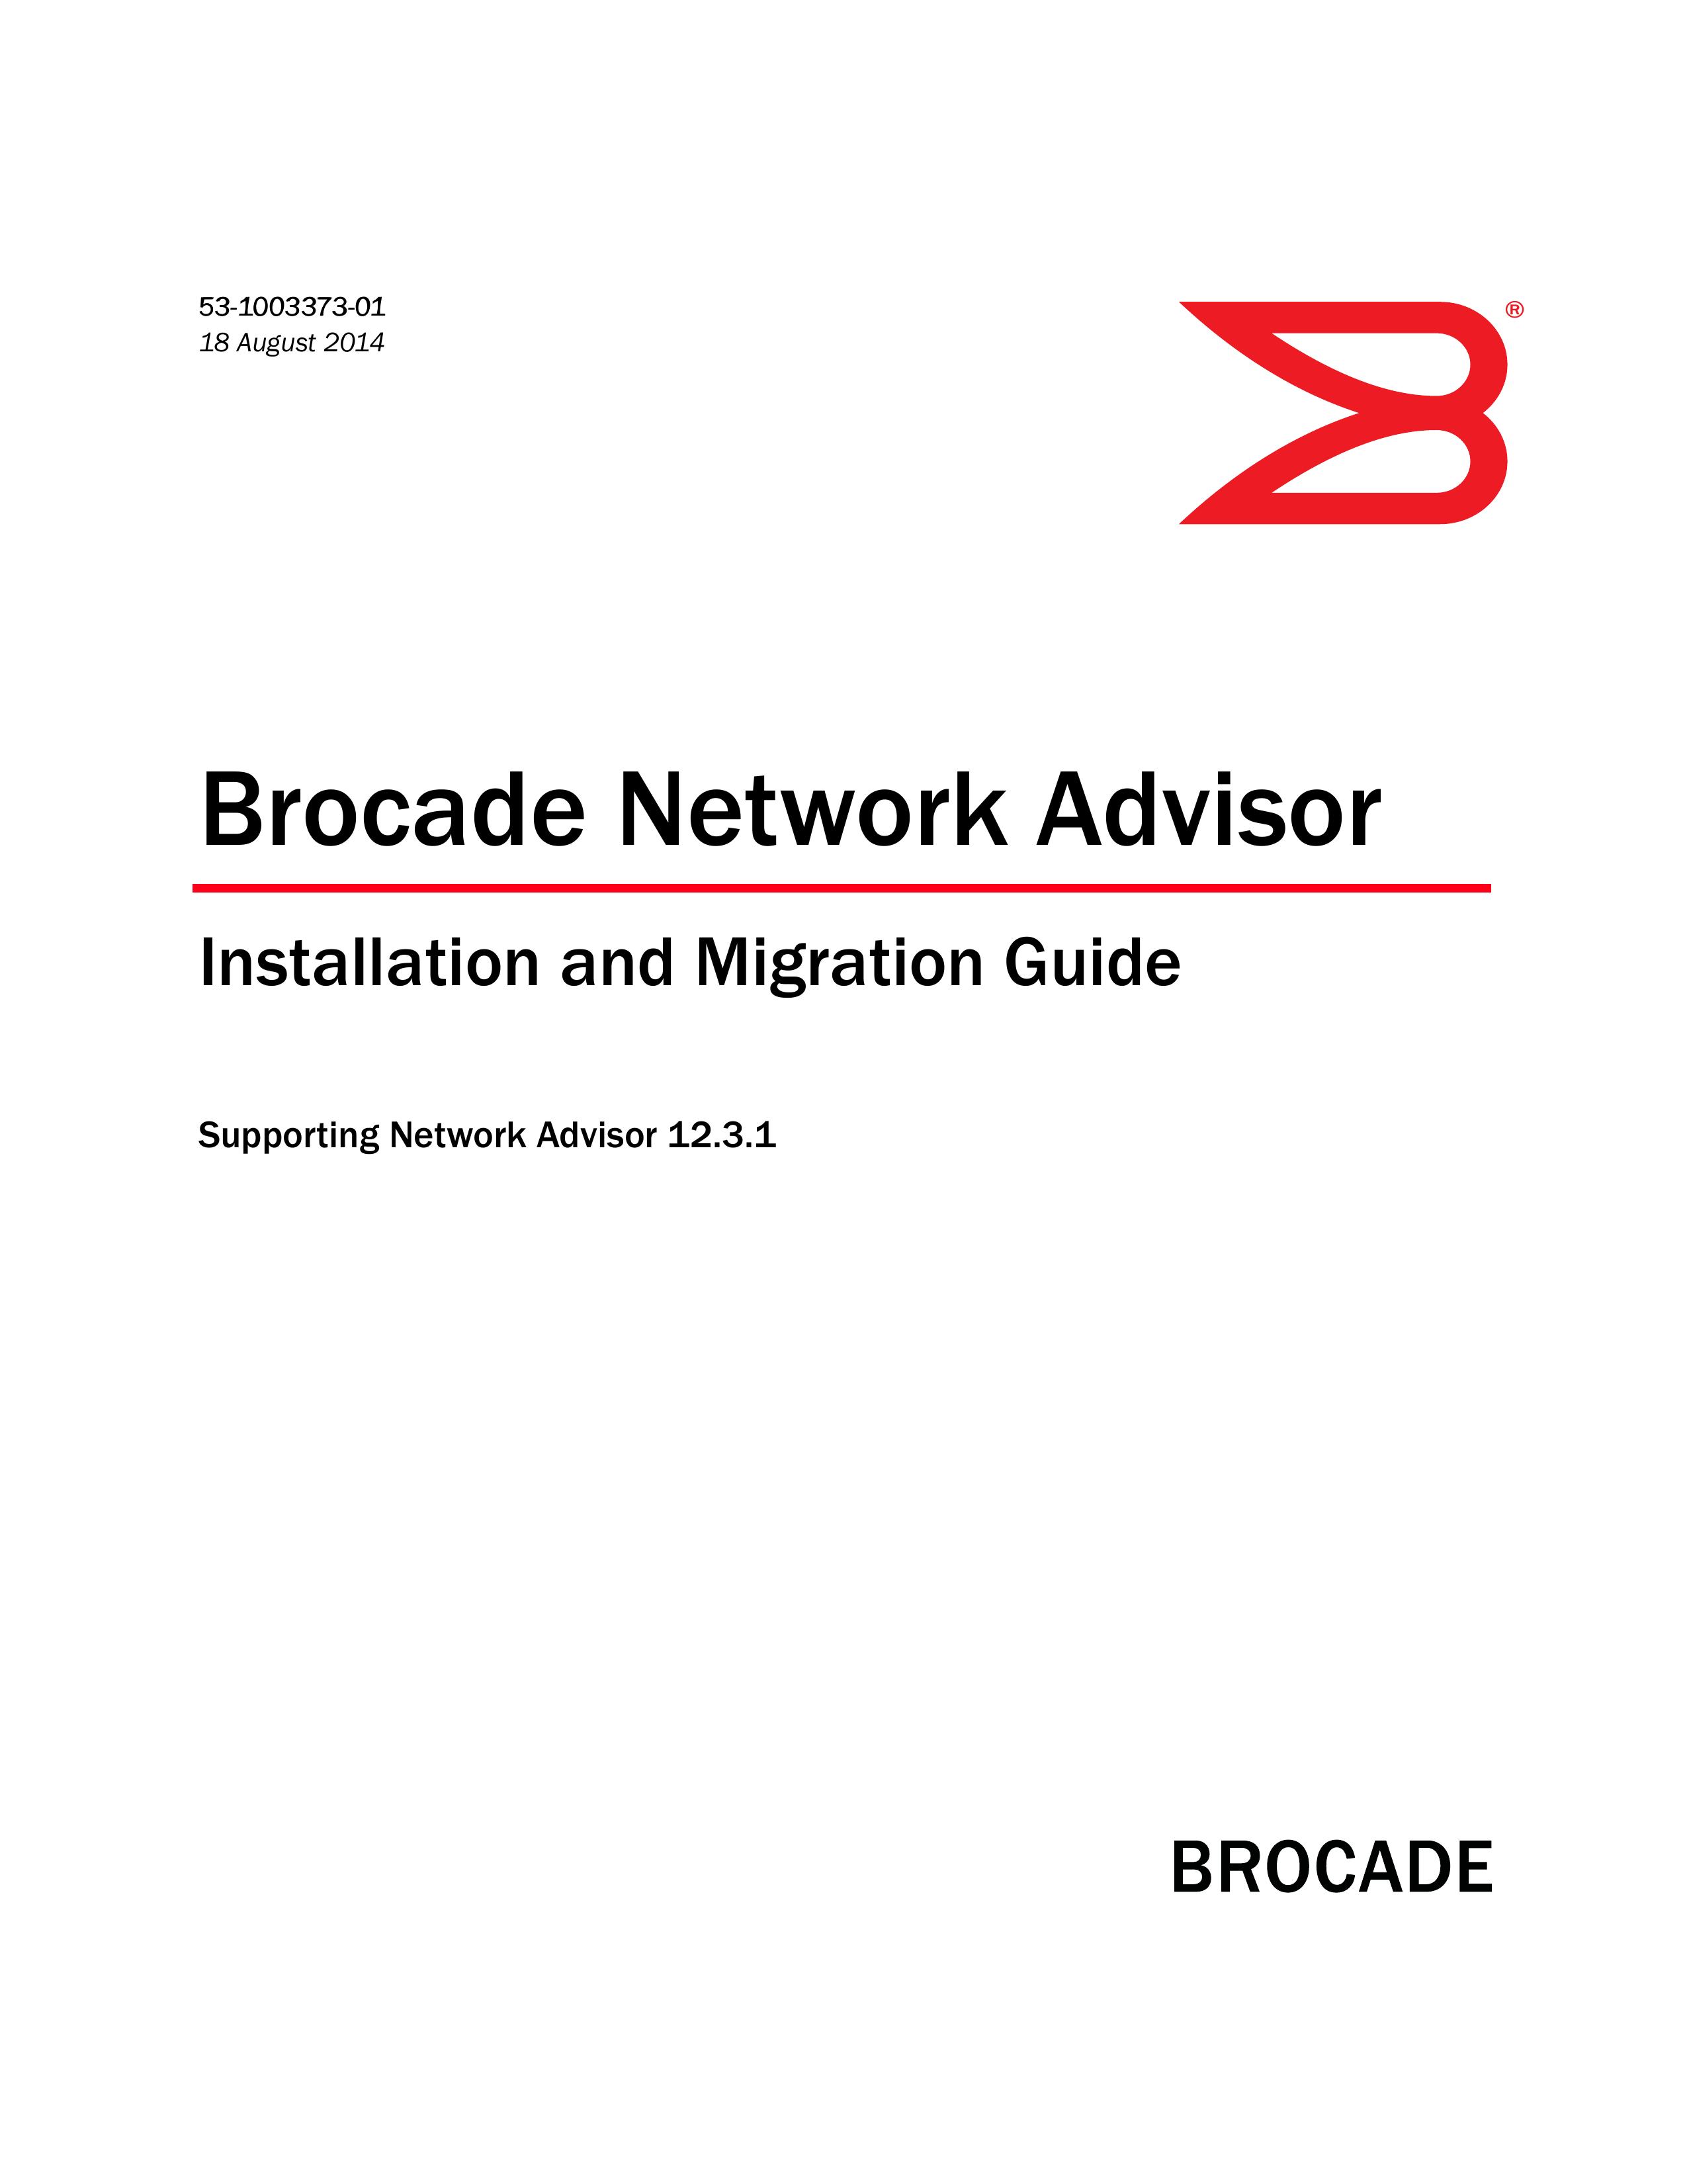 Brocade Communications Systems 53-1003373-01 Security Camera User Manual